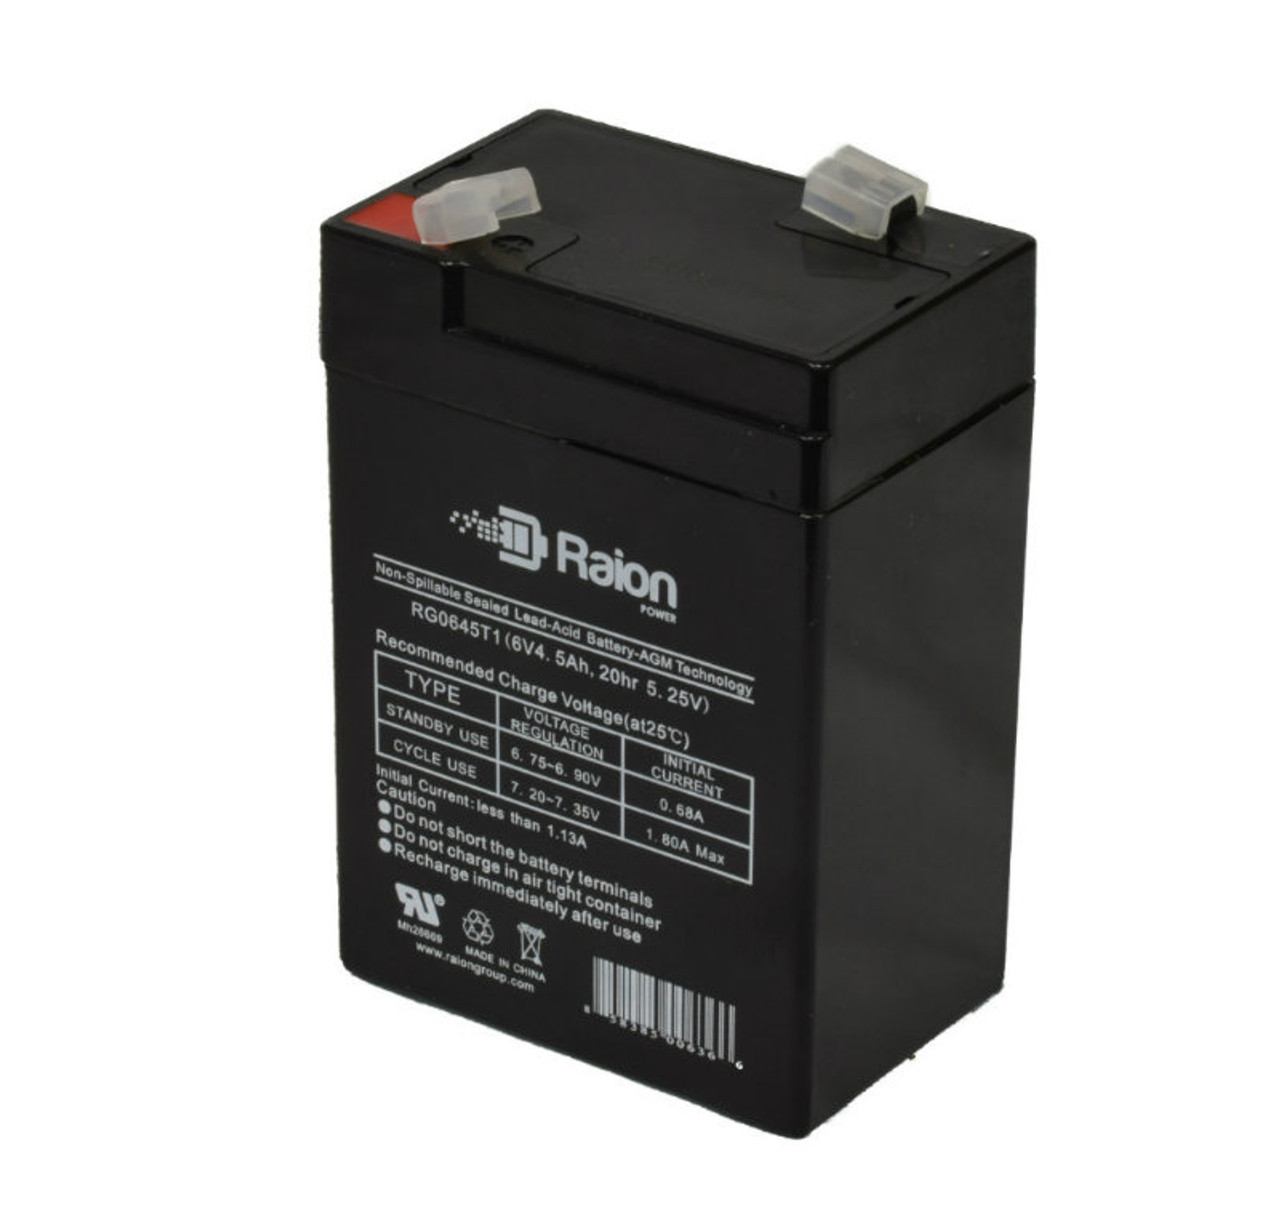 Raion Power RG0645T1 6V 4.5Ah Replacement Battery Cartridge for Universal Power UP4-6